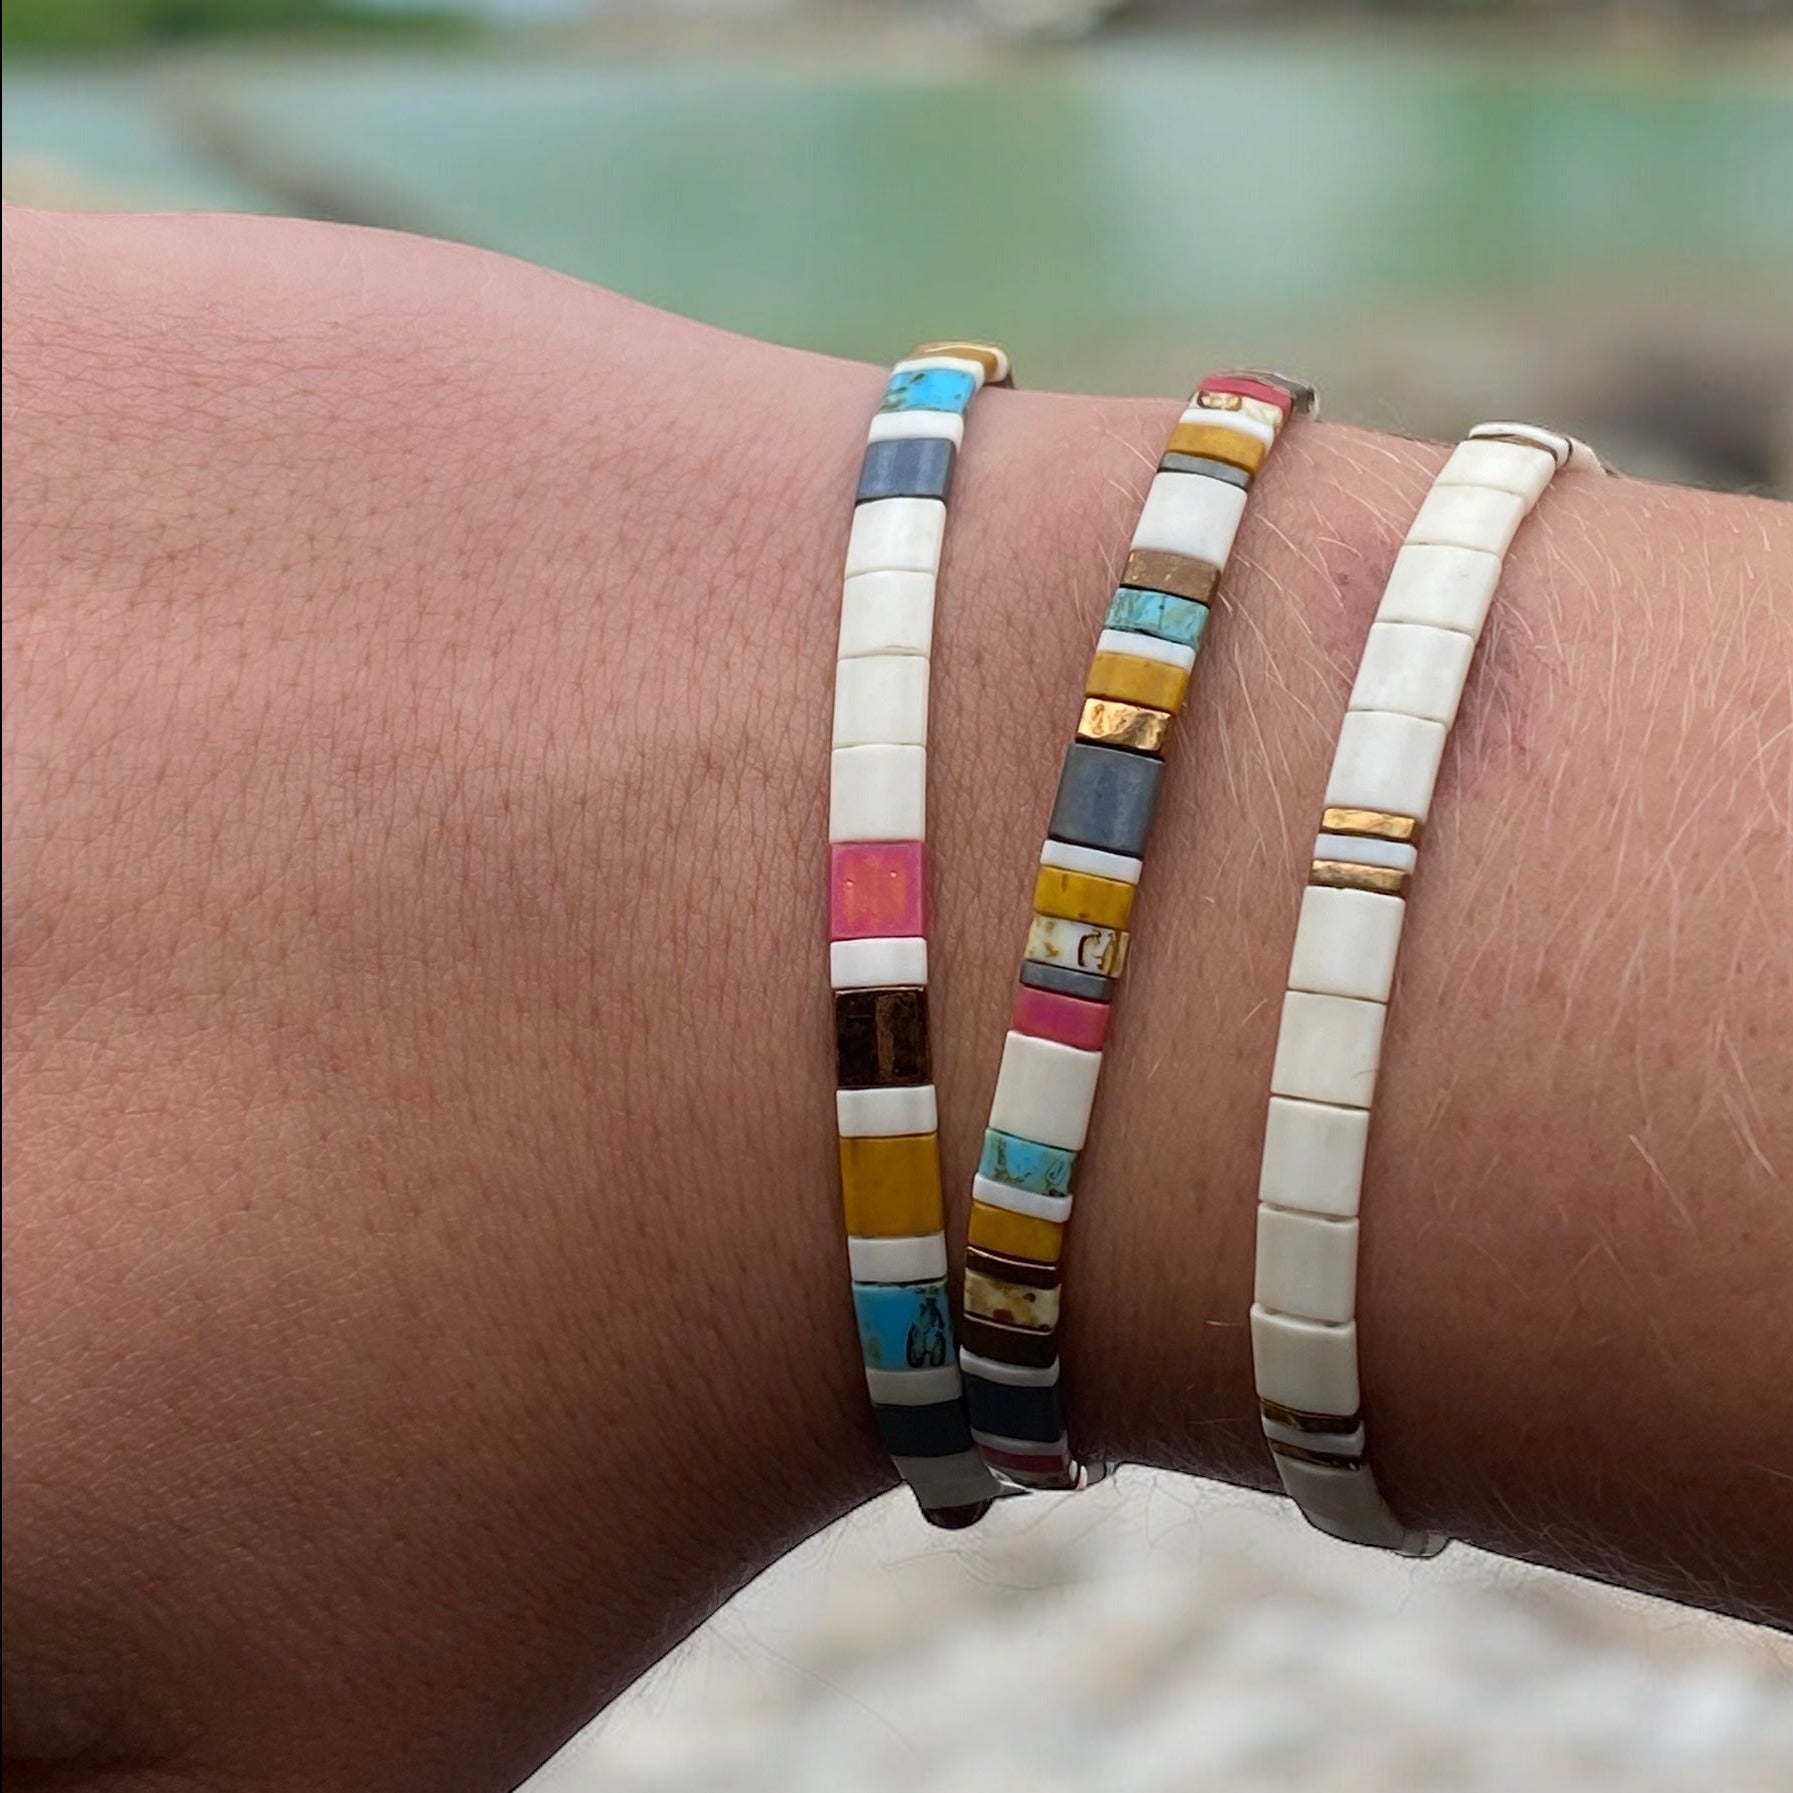 a close up of two bracelets on a person's arm